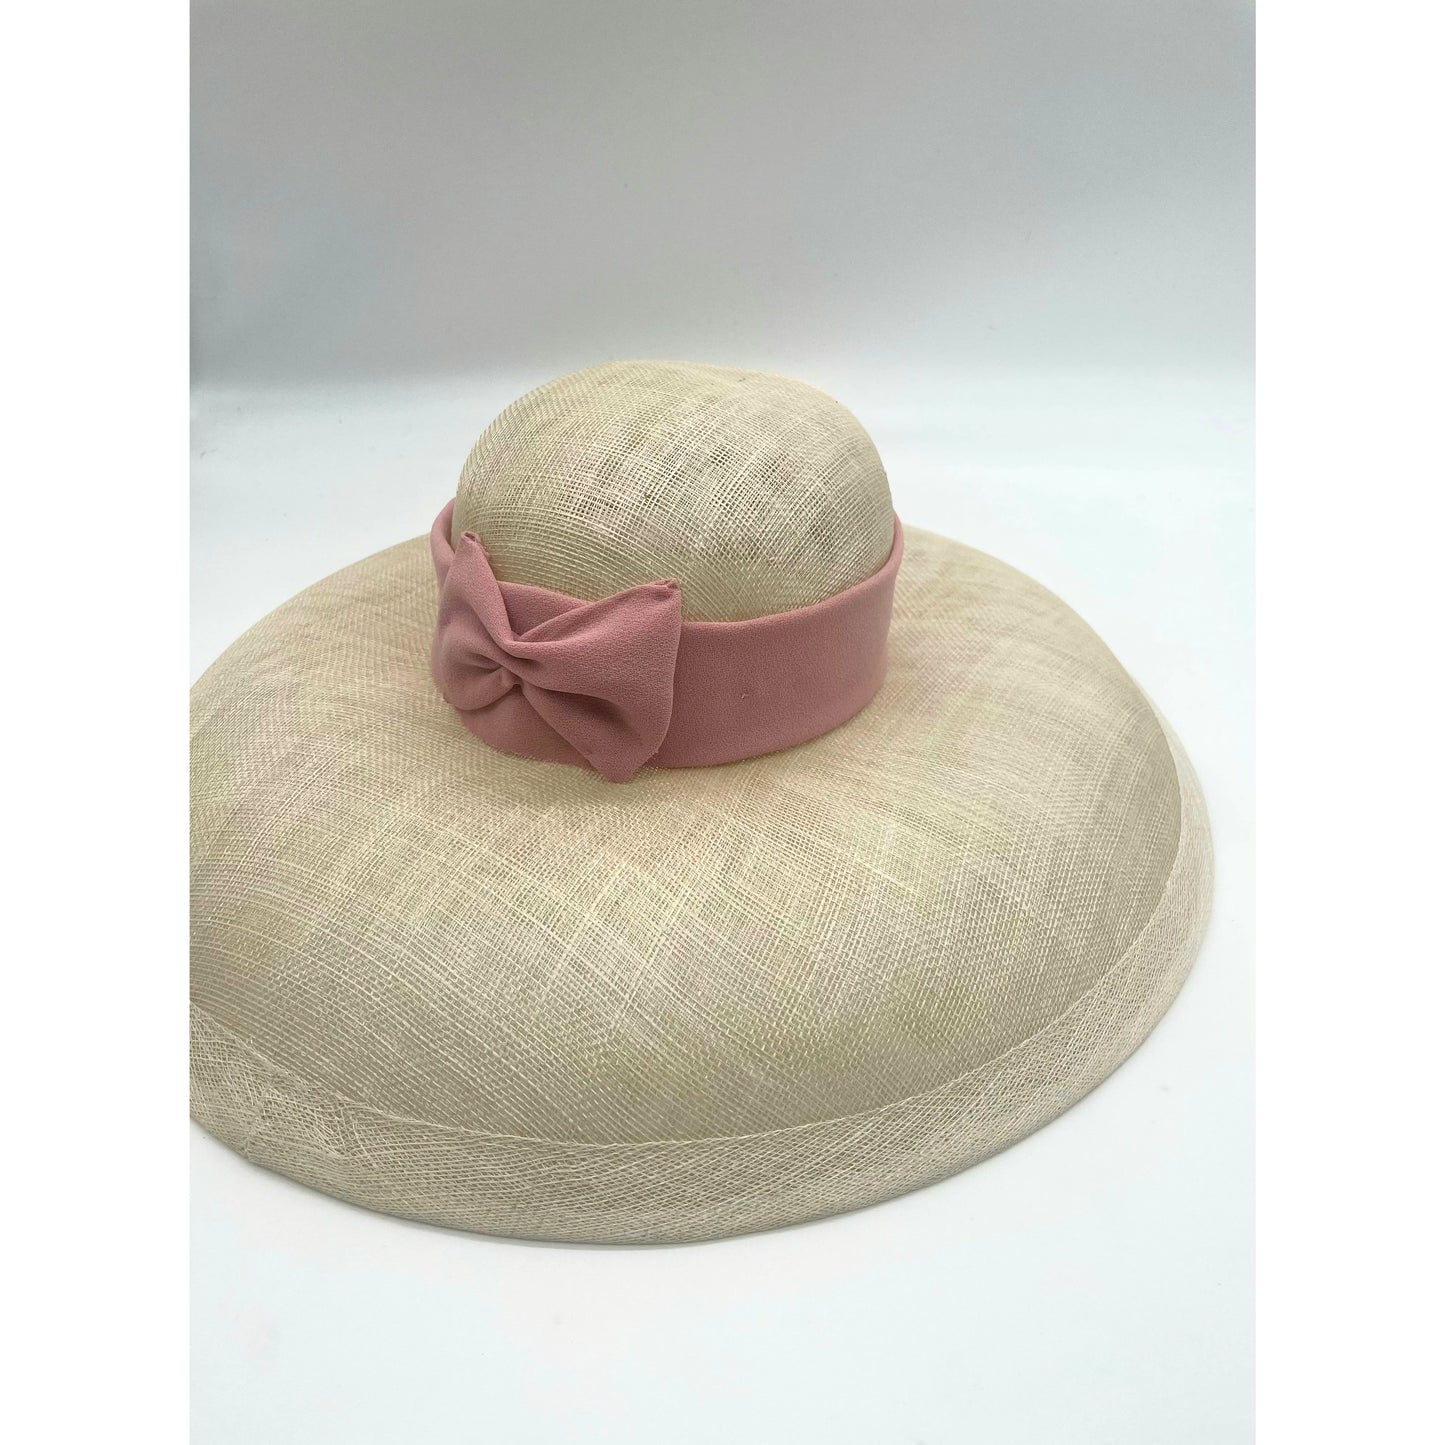 Ivory and Blush hat